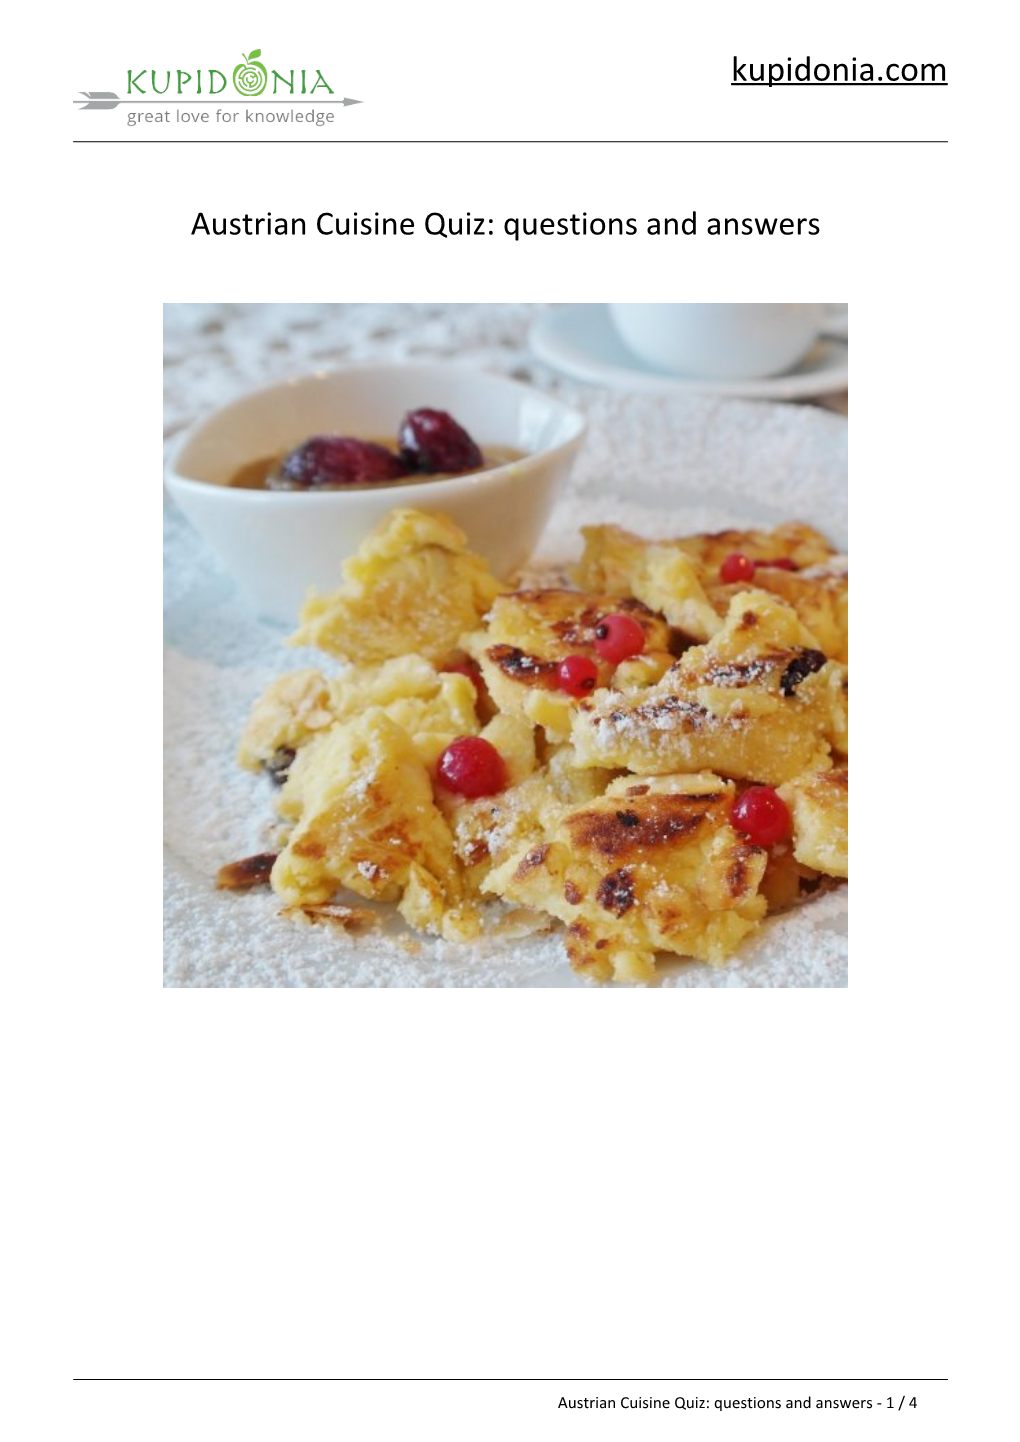 Austrian Cuisine Quiz: Questions and Answers